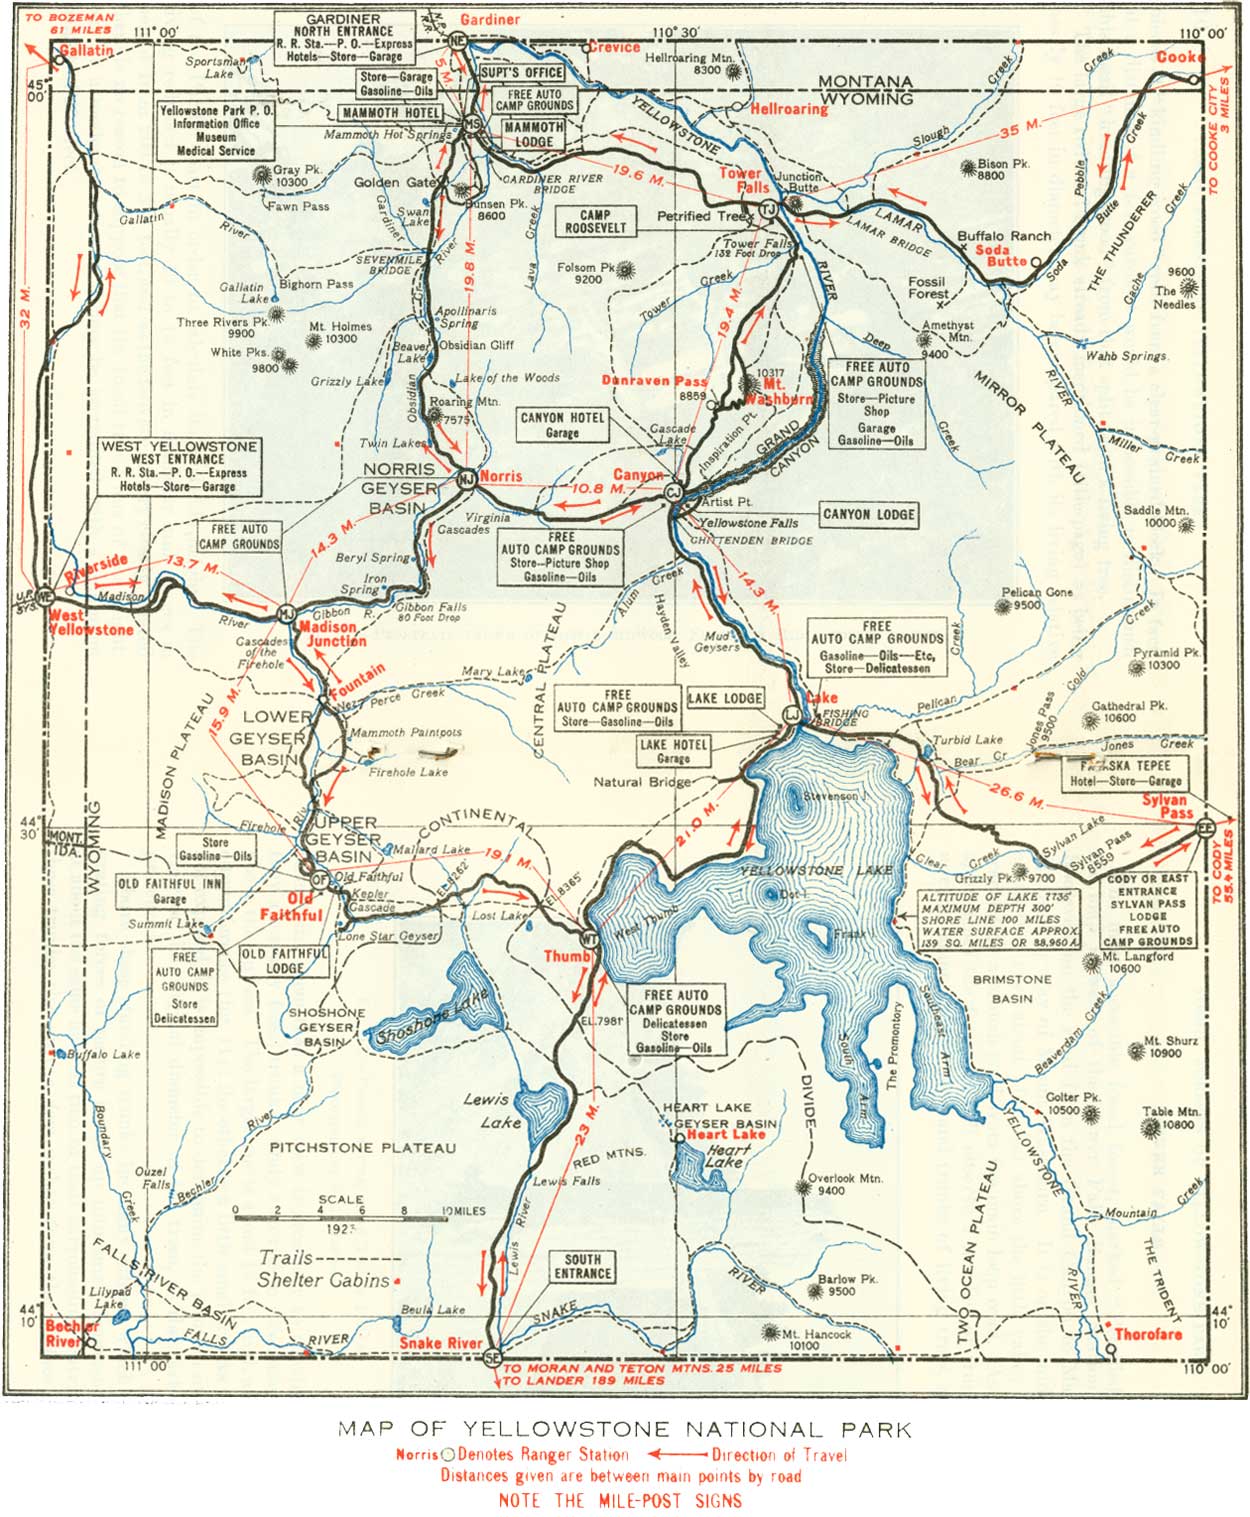 map of yellowstone attractions Yellowstone Np Fossil Forests Of The Yellowstone National Park map of yellowstone attractions